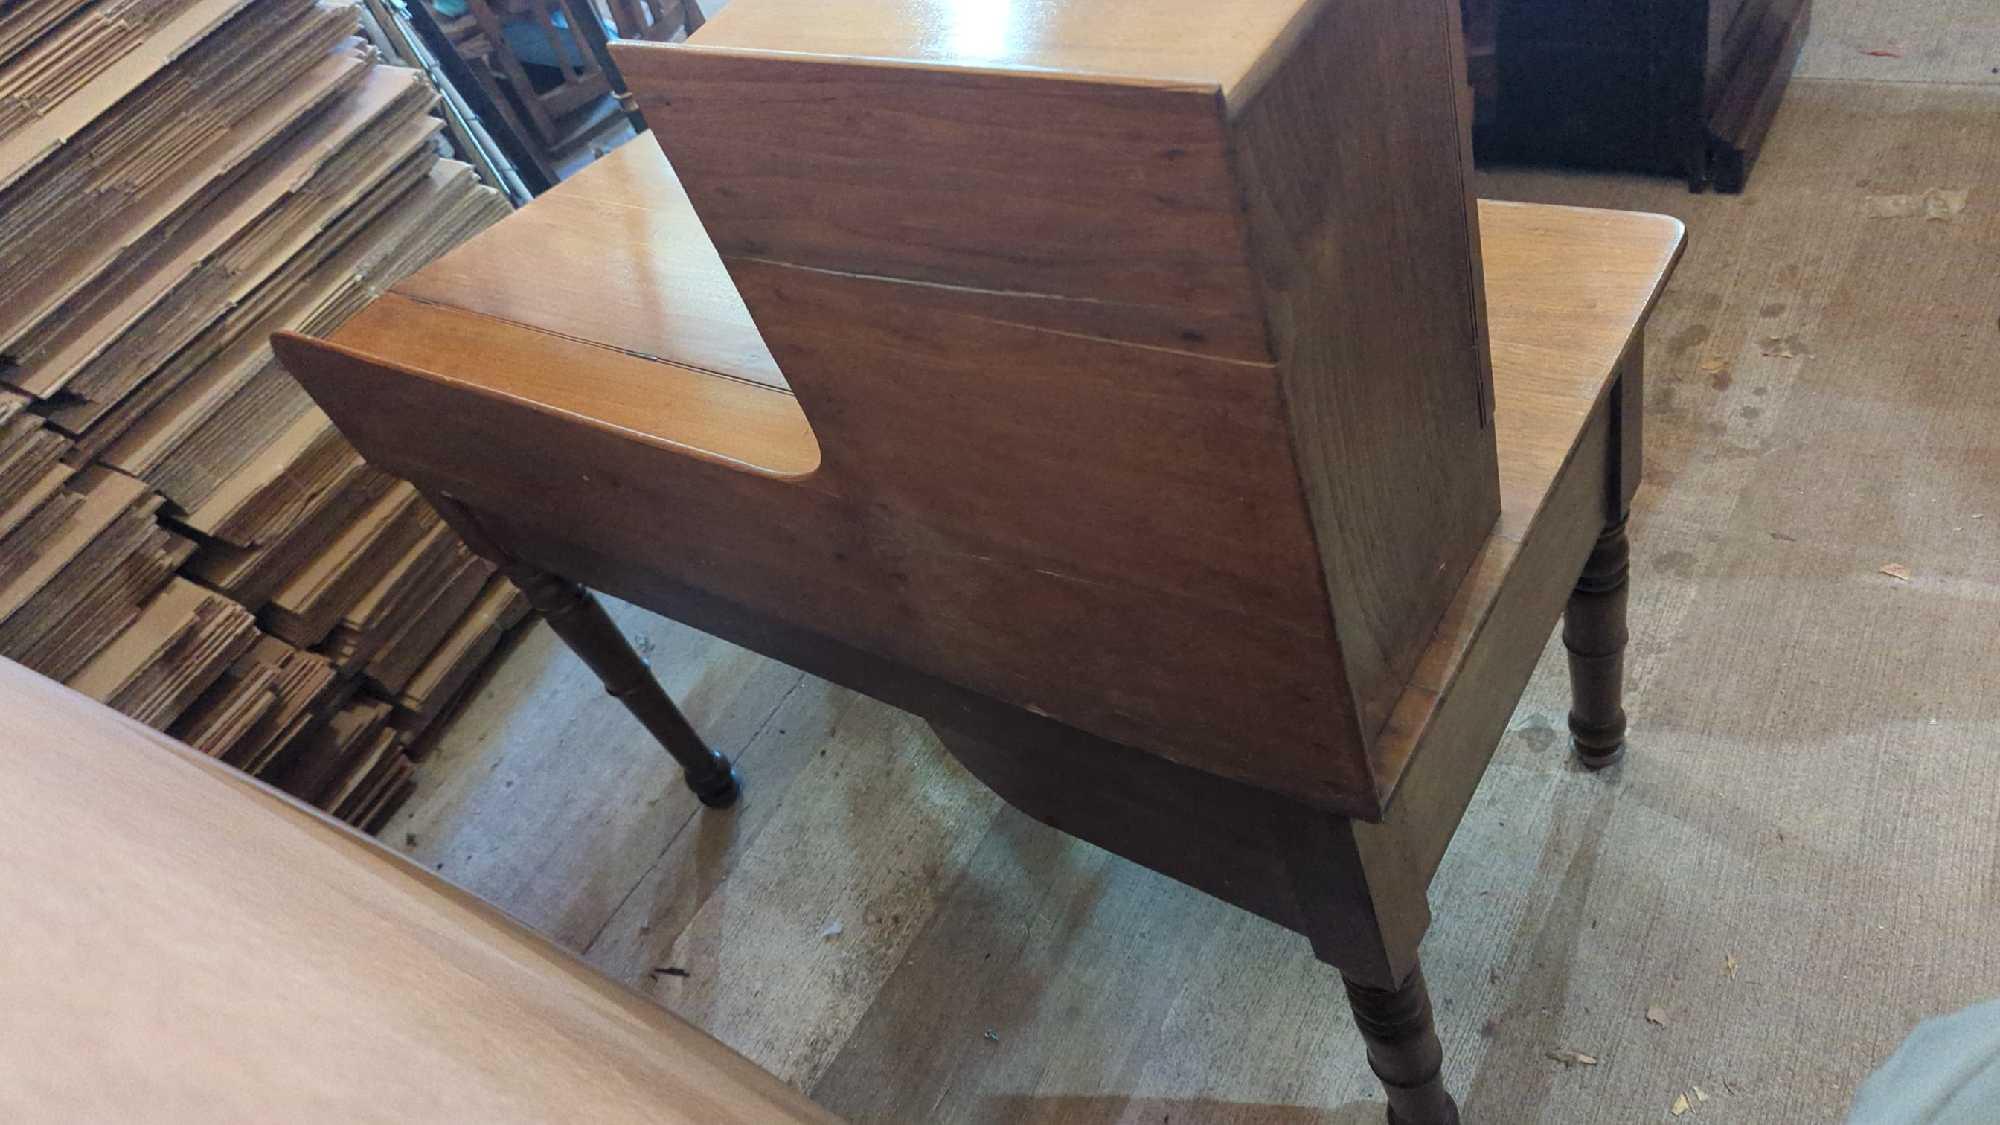 ANTIQUE WRITING DESK WITH CHAIR